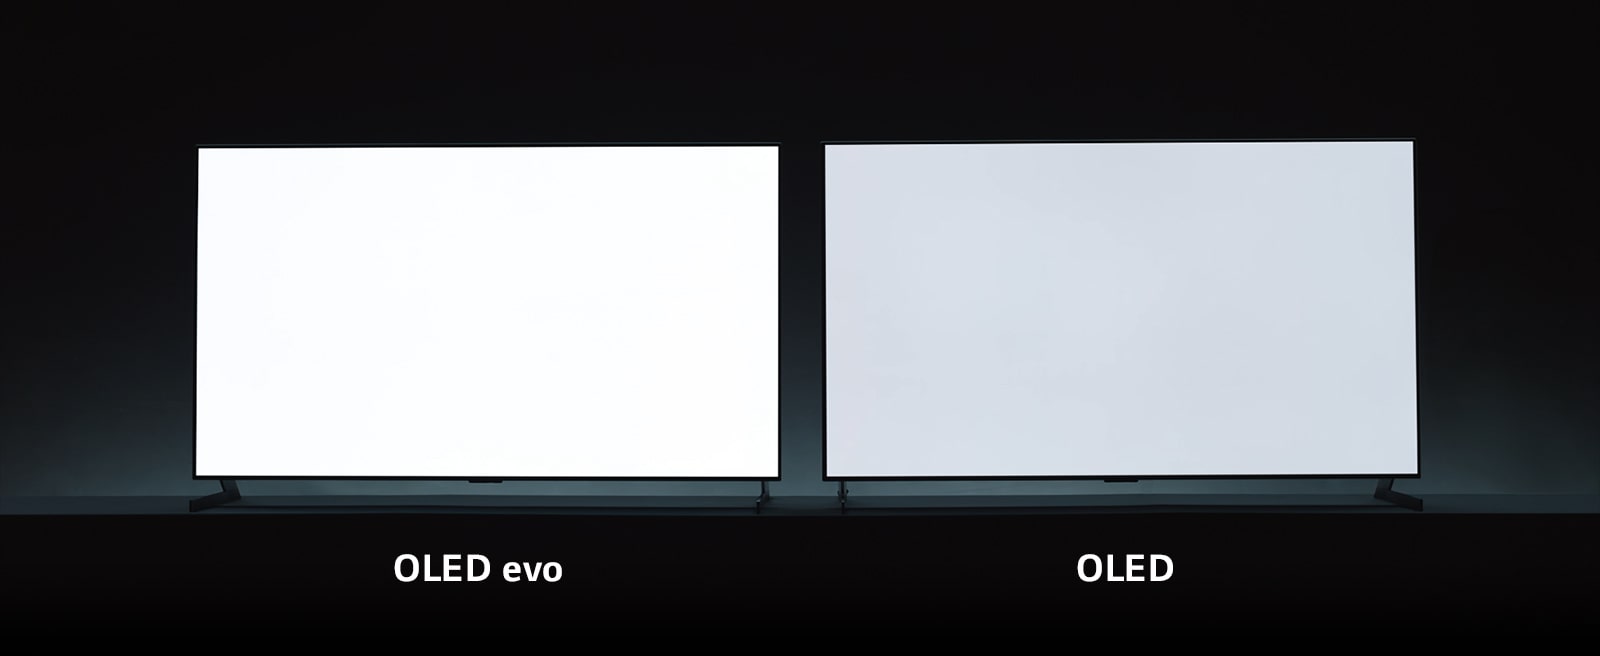 A comparison of brightness of TV between OLED evo and OLED. A TV with OLED evo displaying a white image is brighter than a TV with OLED.